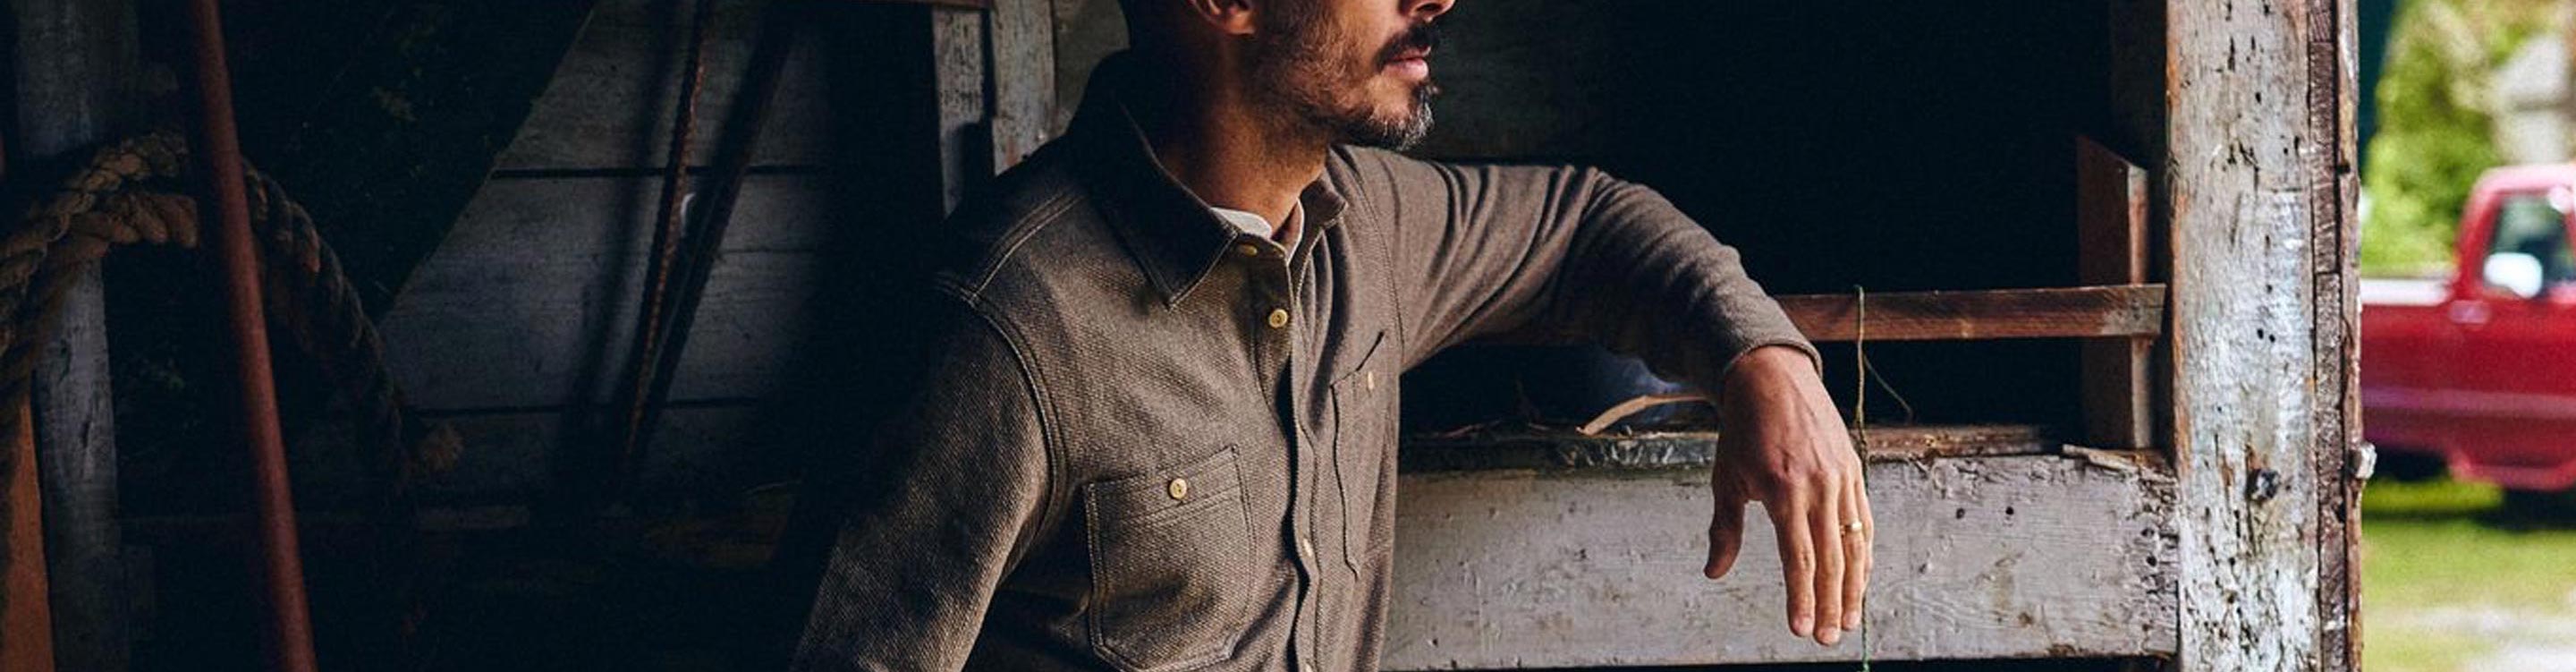 The Knit | Twill Shirts Shirt in for Stitch Knit Utility Taylor Men -